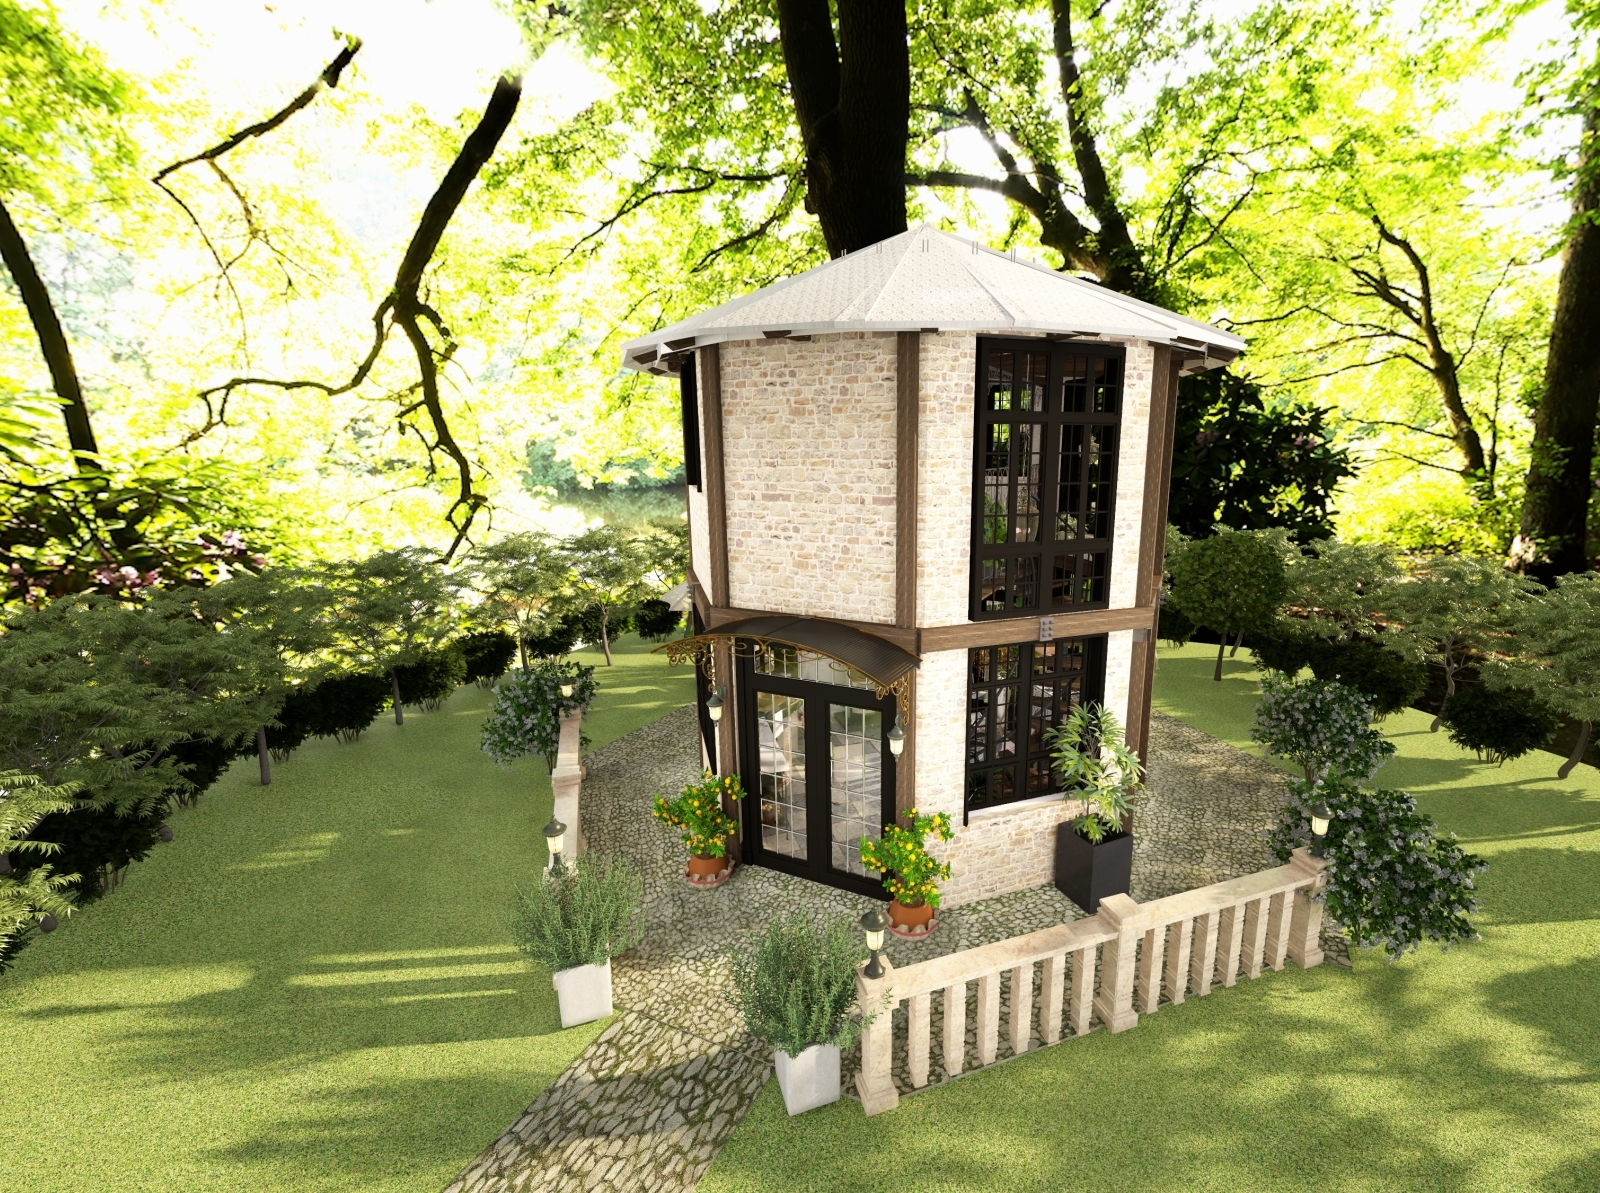 Tiny House Exterior Design by Vanessa Redford on Dribbble